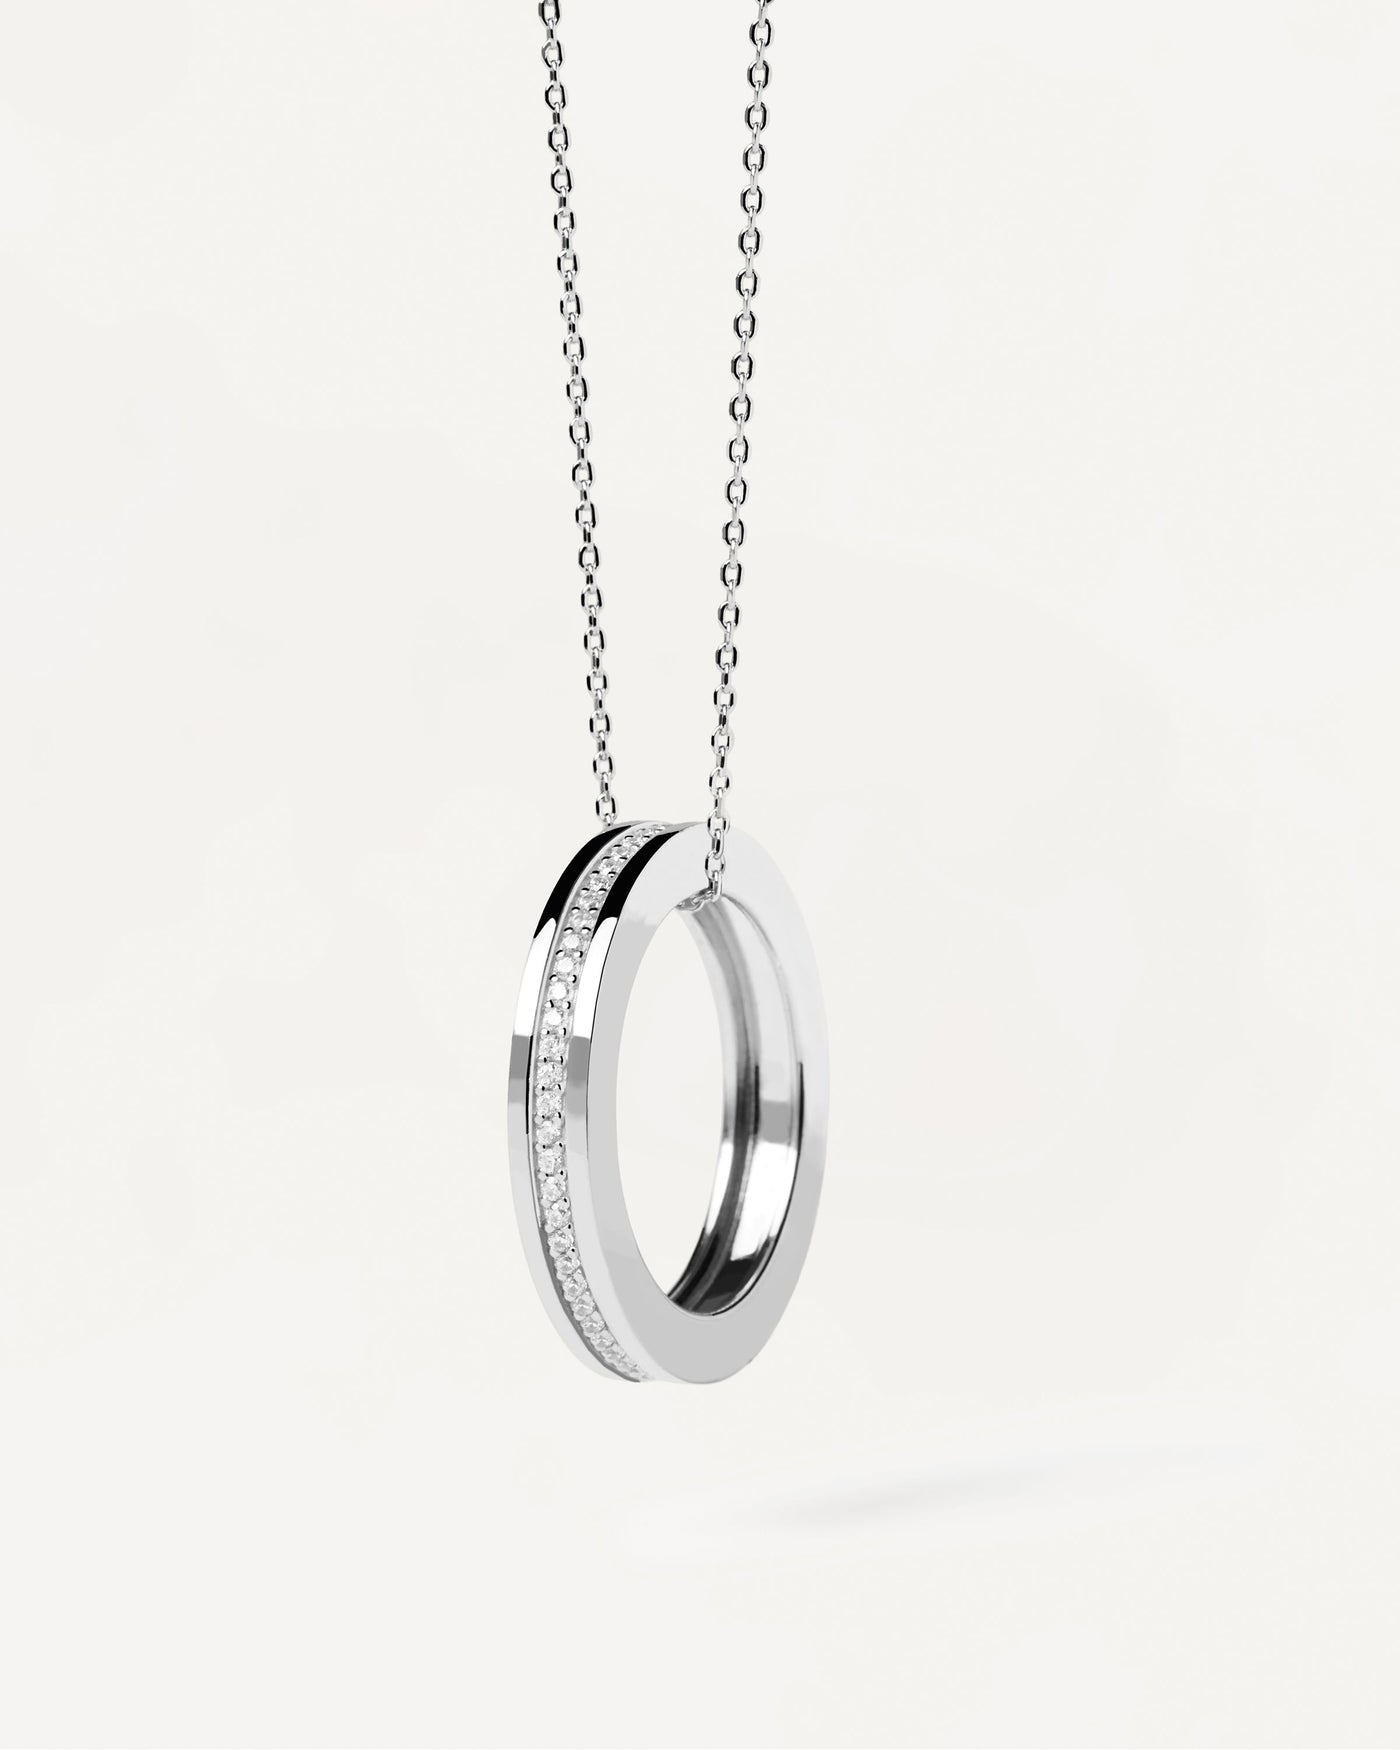 2023 Selection | Infinity Silver Necklace. Sterling silver necklace with ring pendant. Get the latest arrival from PDPAOLA. Place your order safely and get this Best Seller. Free Shipping.